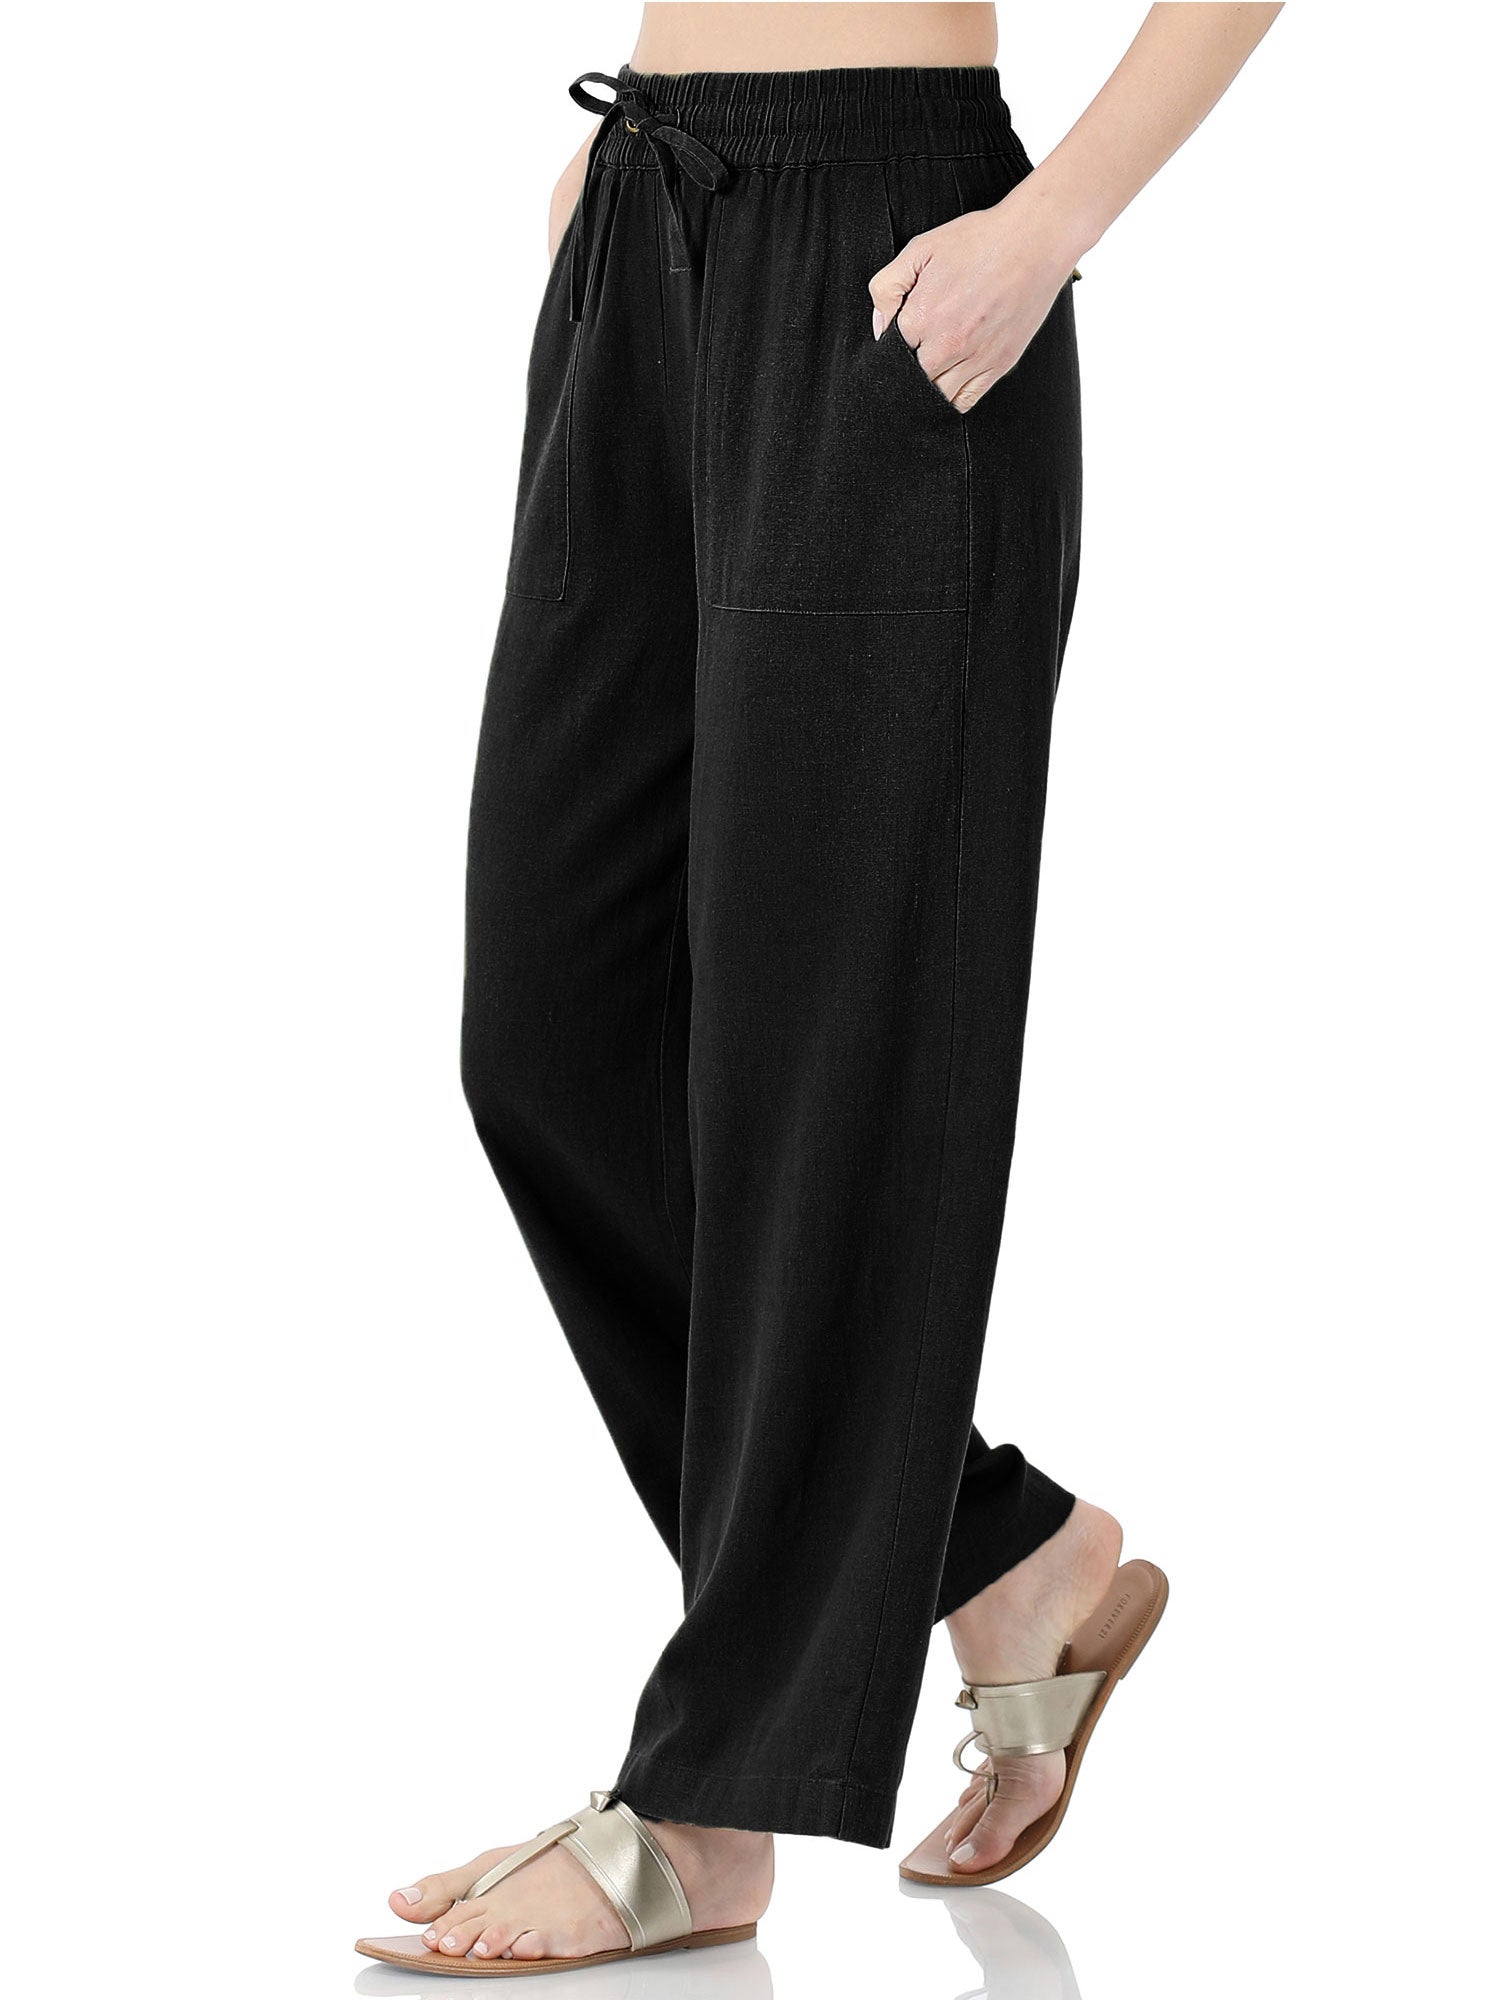 These Travel Pants Are 30% Off